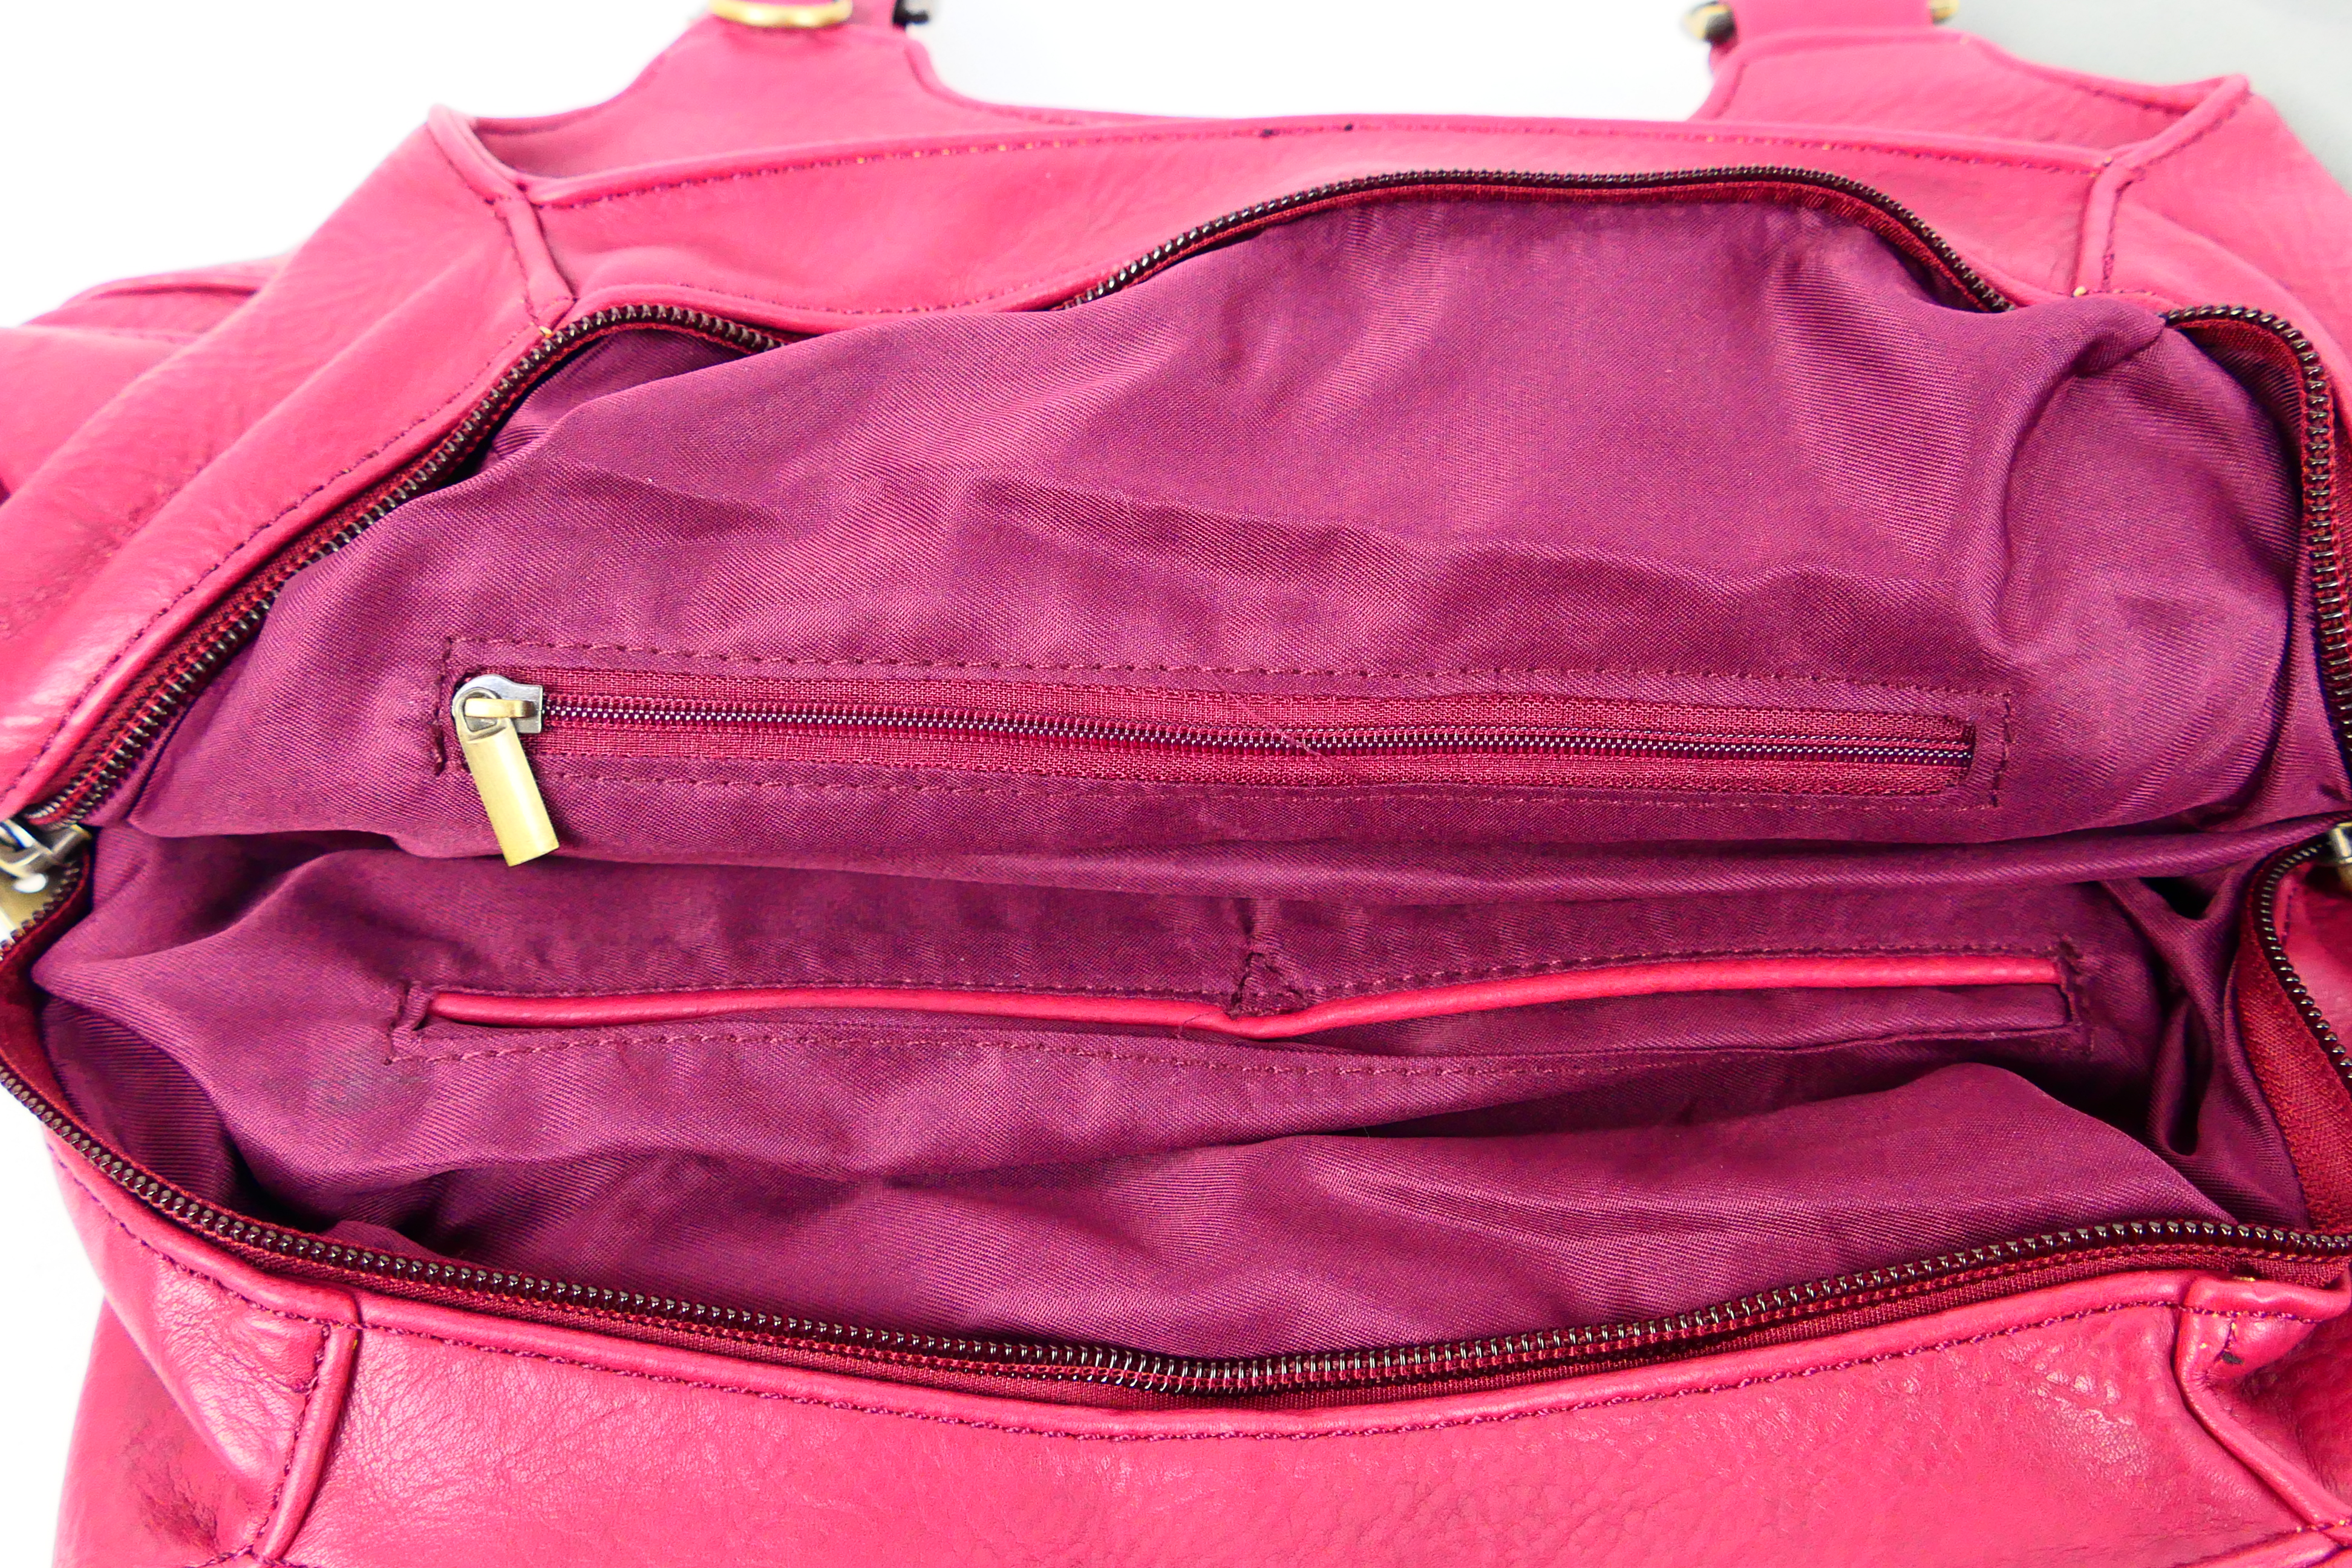 Mabel London - A Mabel London handbag in a shade of red. With two carry handles and shoulder strap. - Image 9 of 9